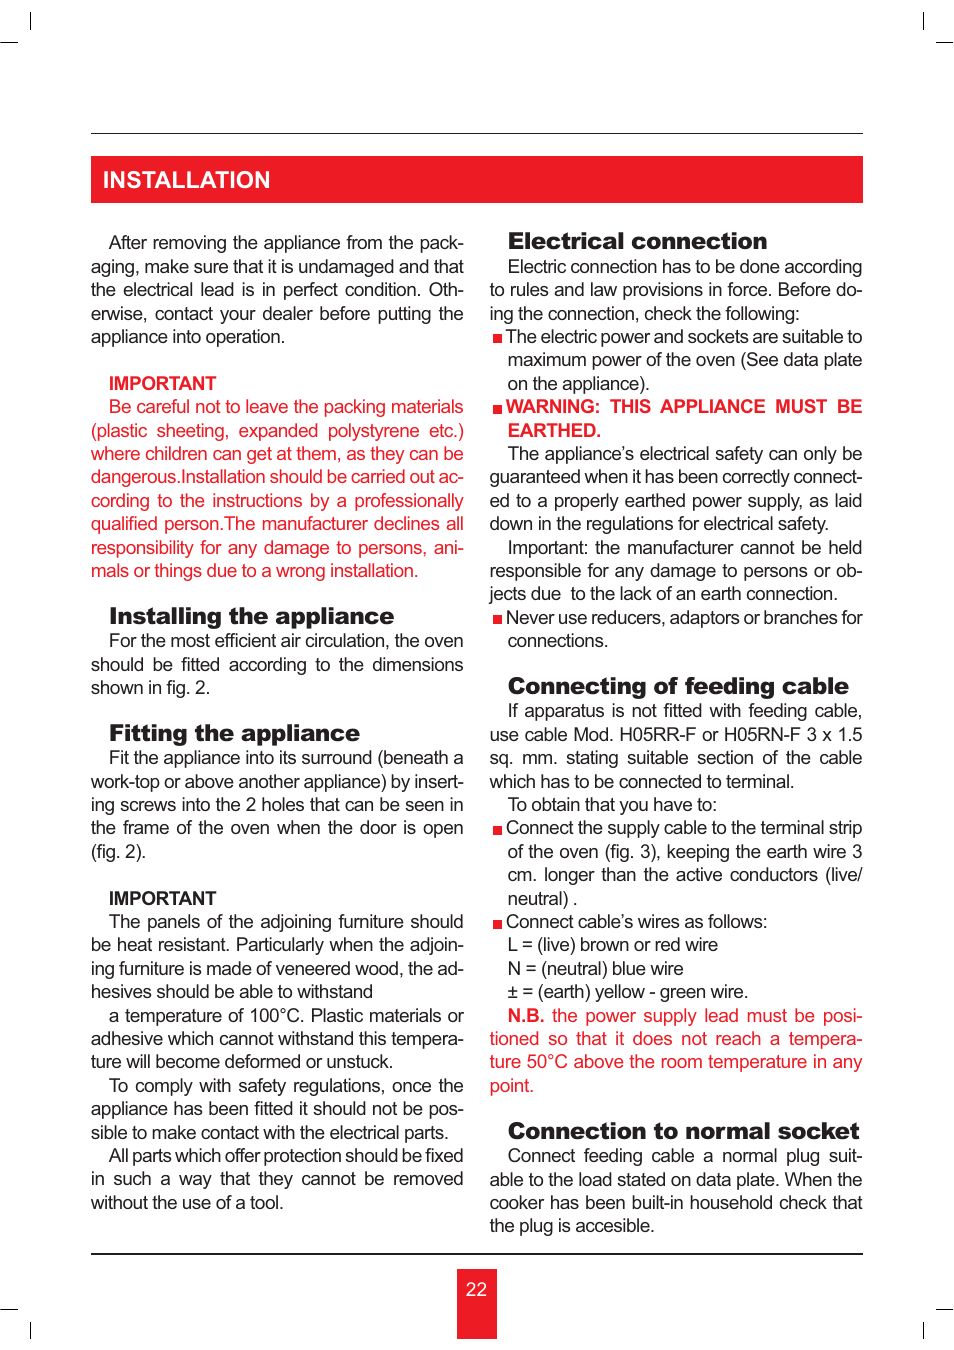 Installation, Installing the appliance, Fitting the appliance | Electrical connection, Connecting of feeding cable, Connection to normal socket | KORTING OKB481CRC User Manual | Page 22 / 36